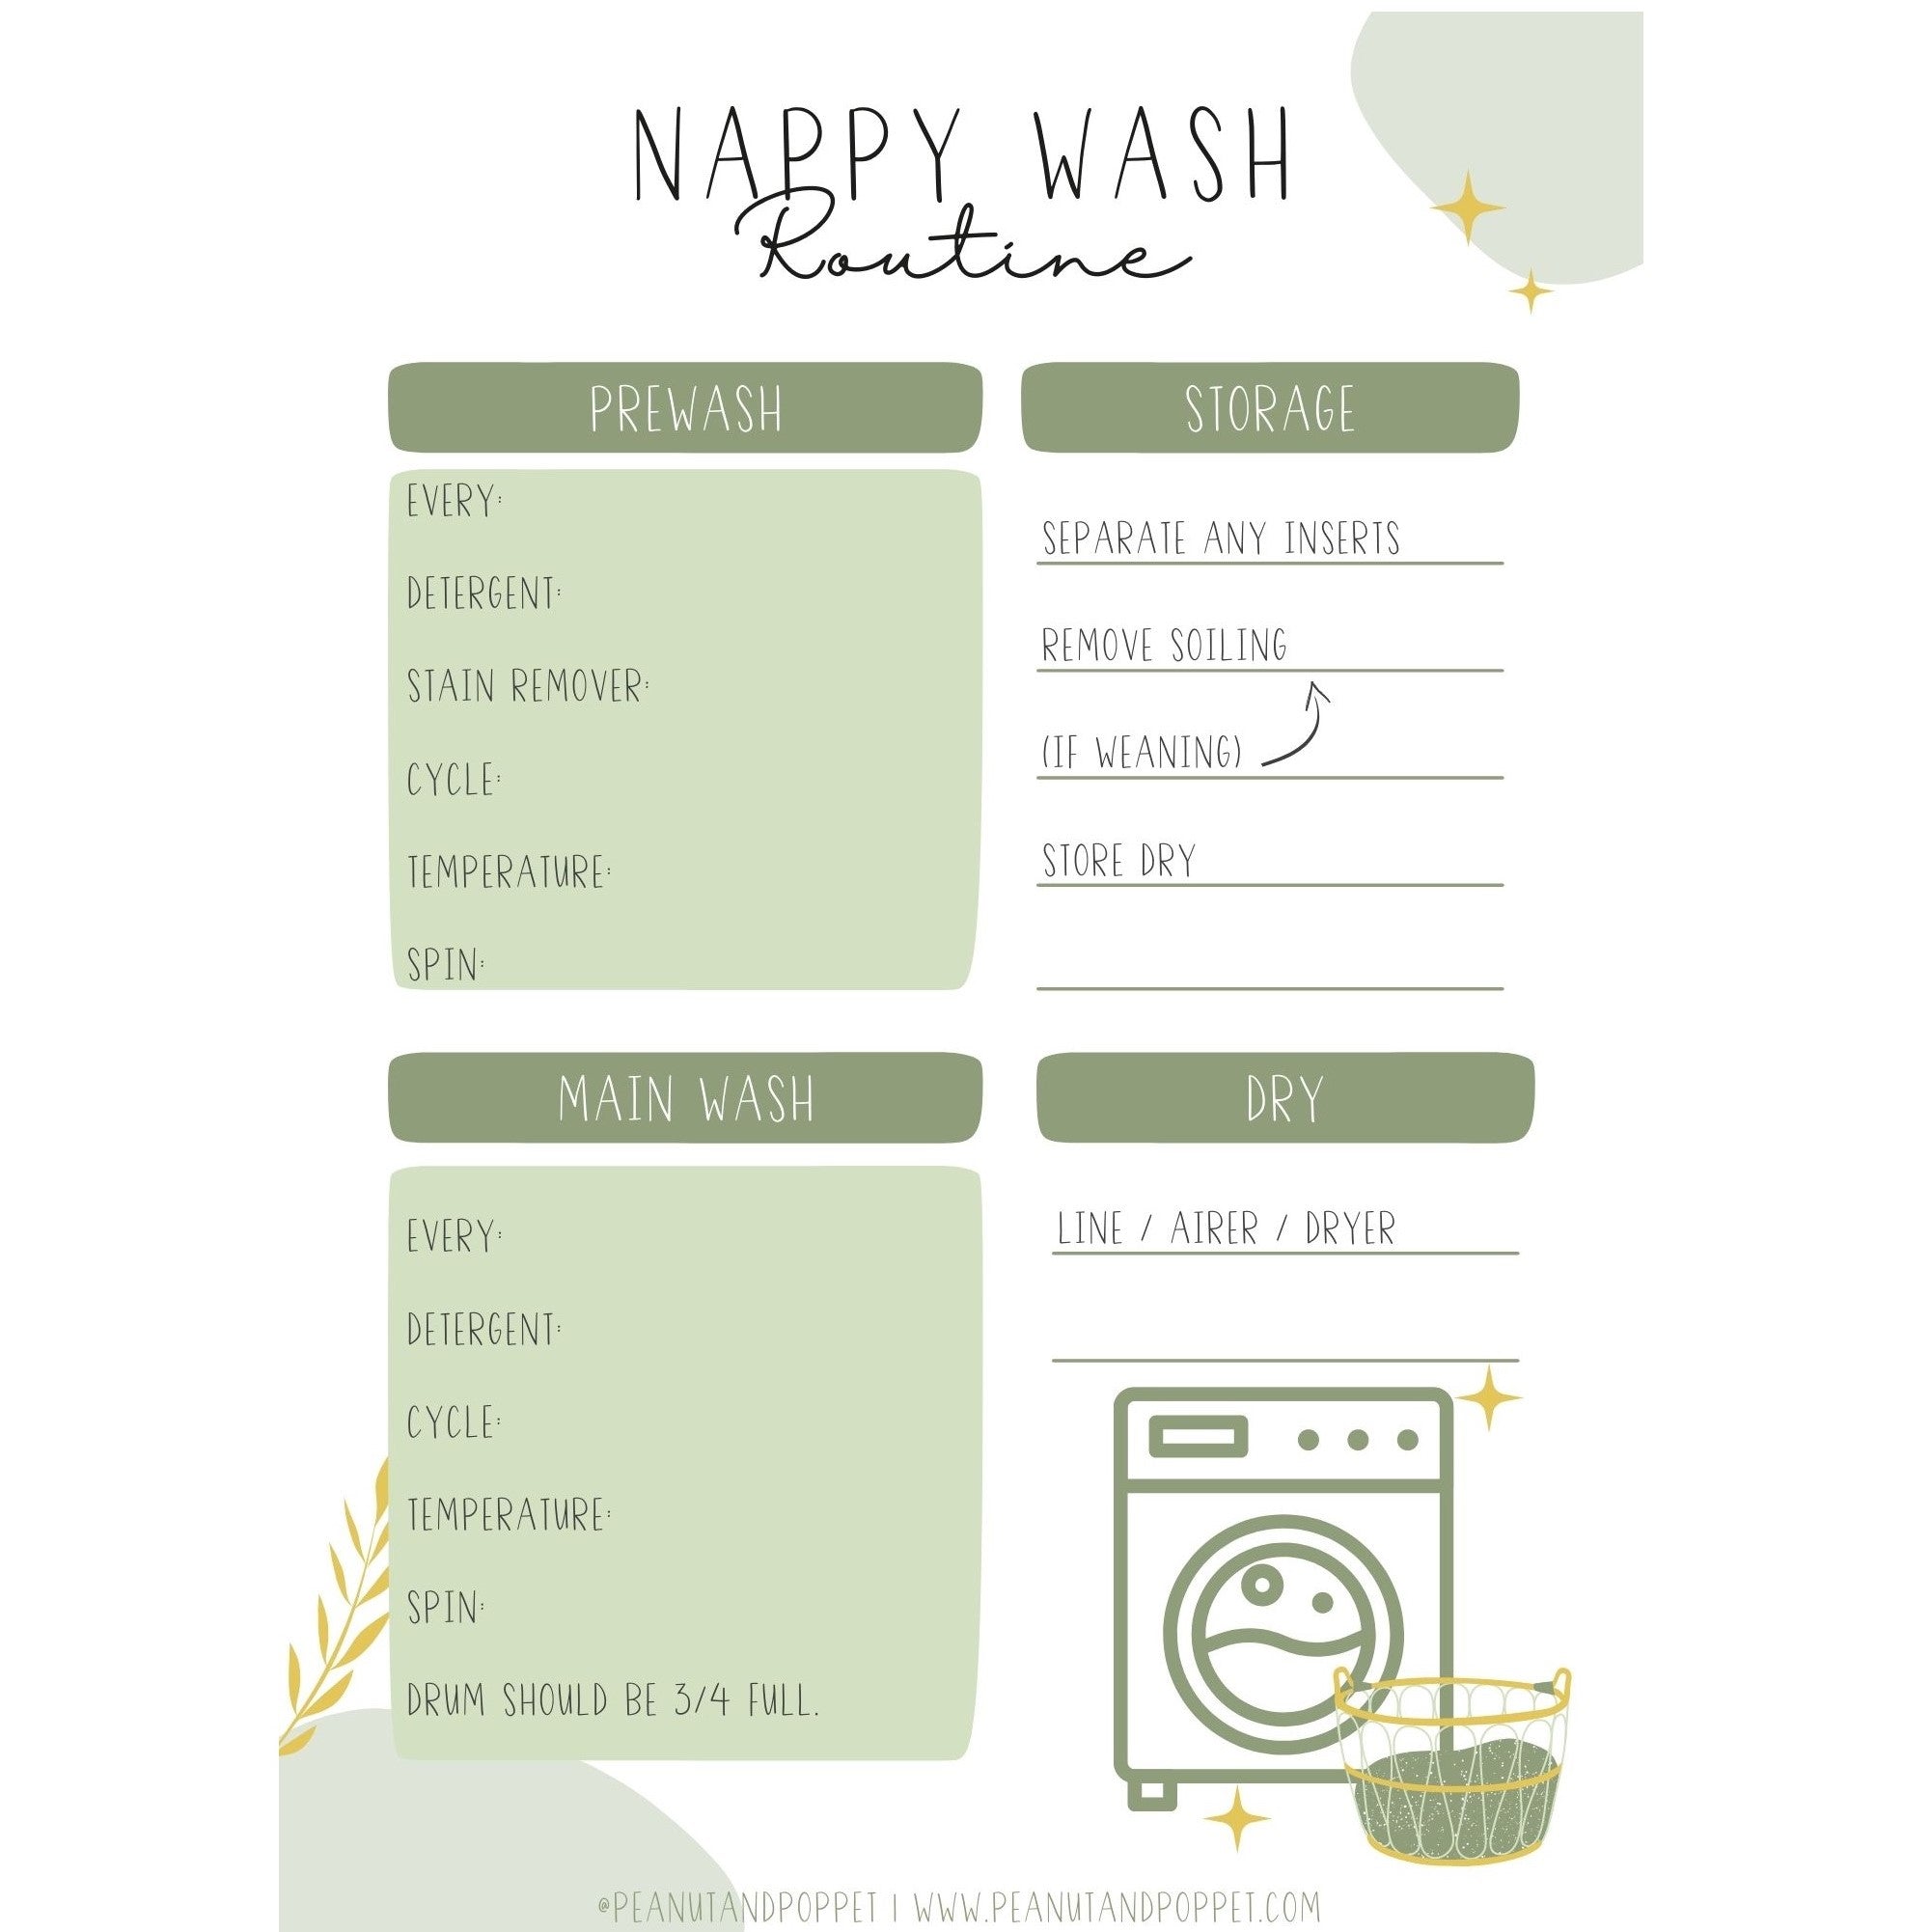 Free reusable nappy wash routine template (green) - washing instructions - Peanut and Poppet UK